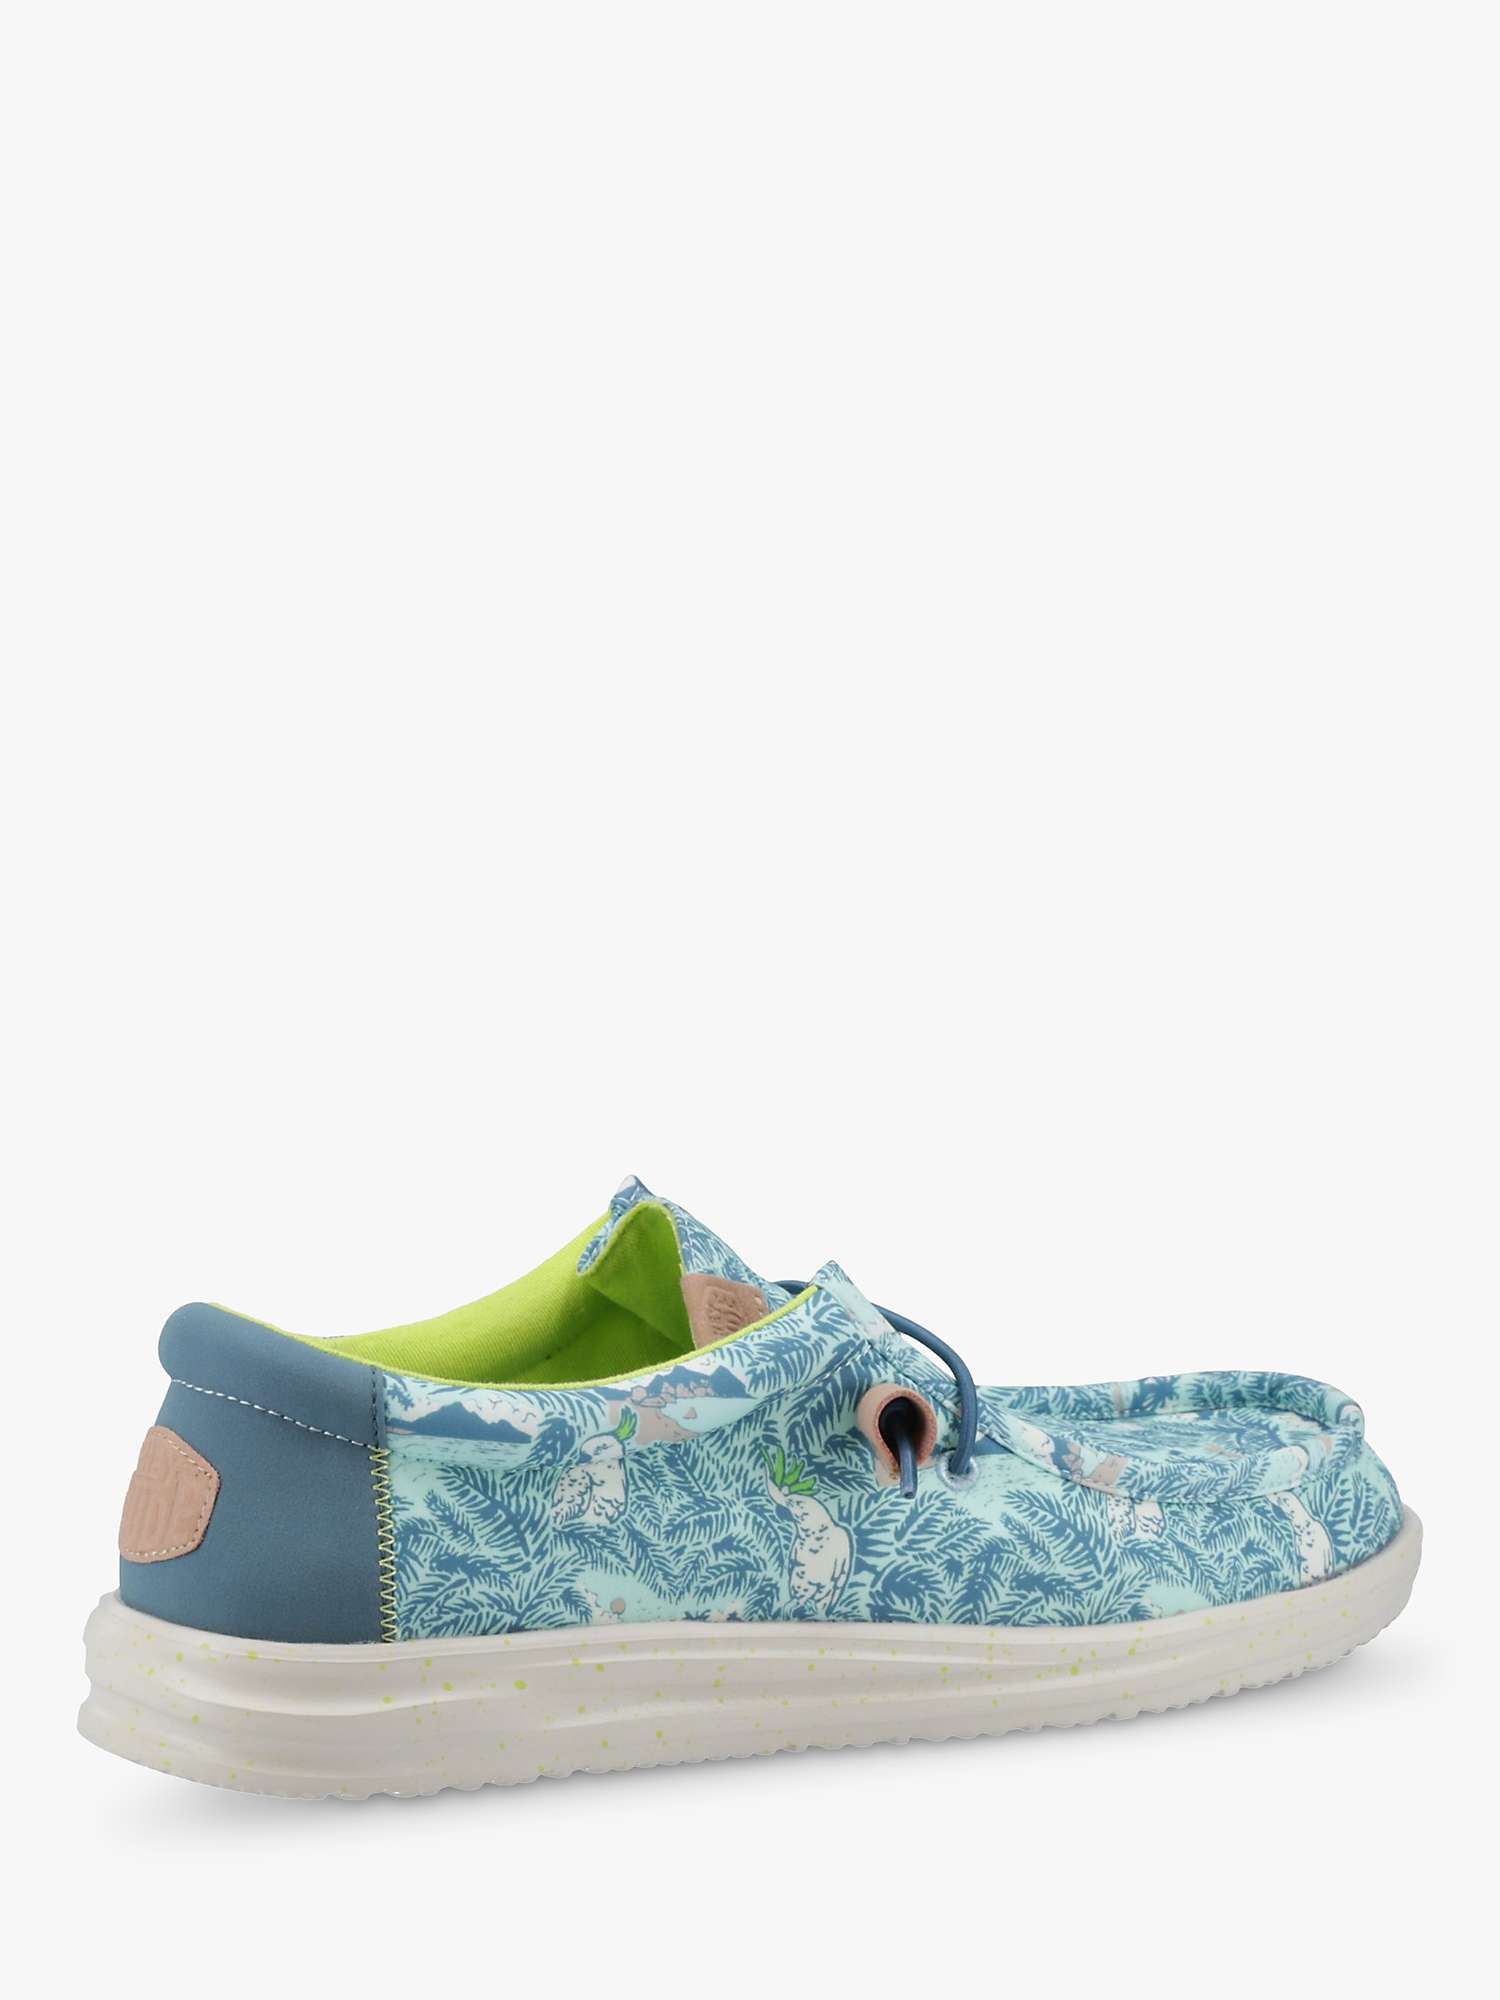 Buy Hey Dude Wally H2O Tropical Print Shoes Online at johnlewis.com